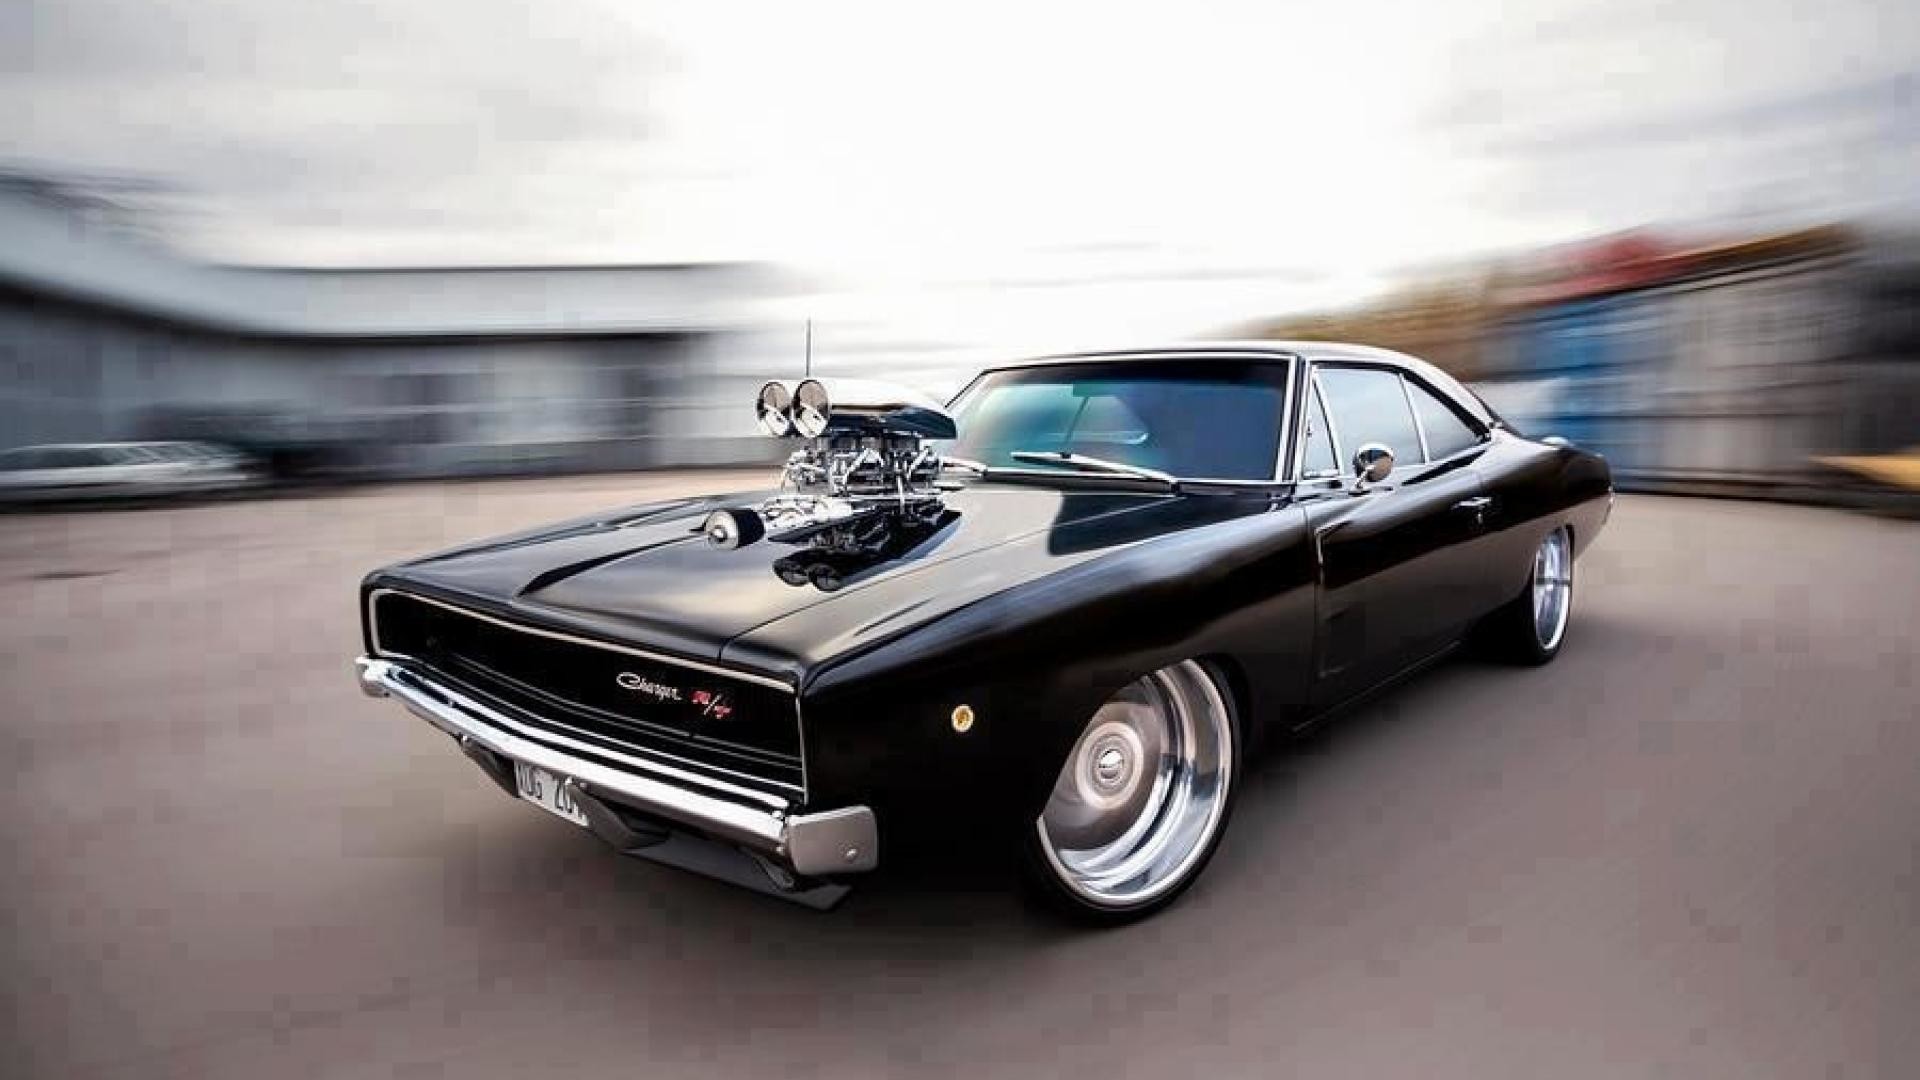 Dodge Charger Rt Wallpaper Image